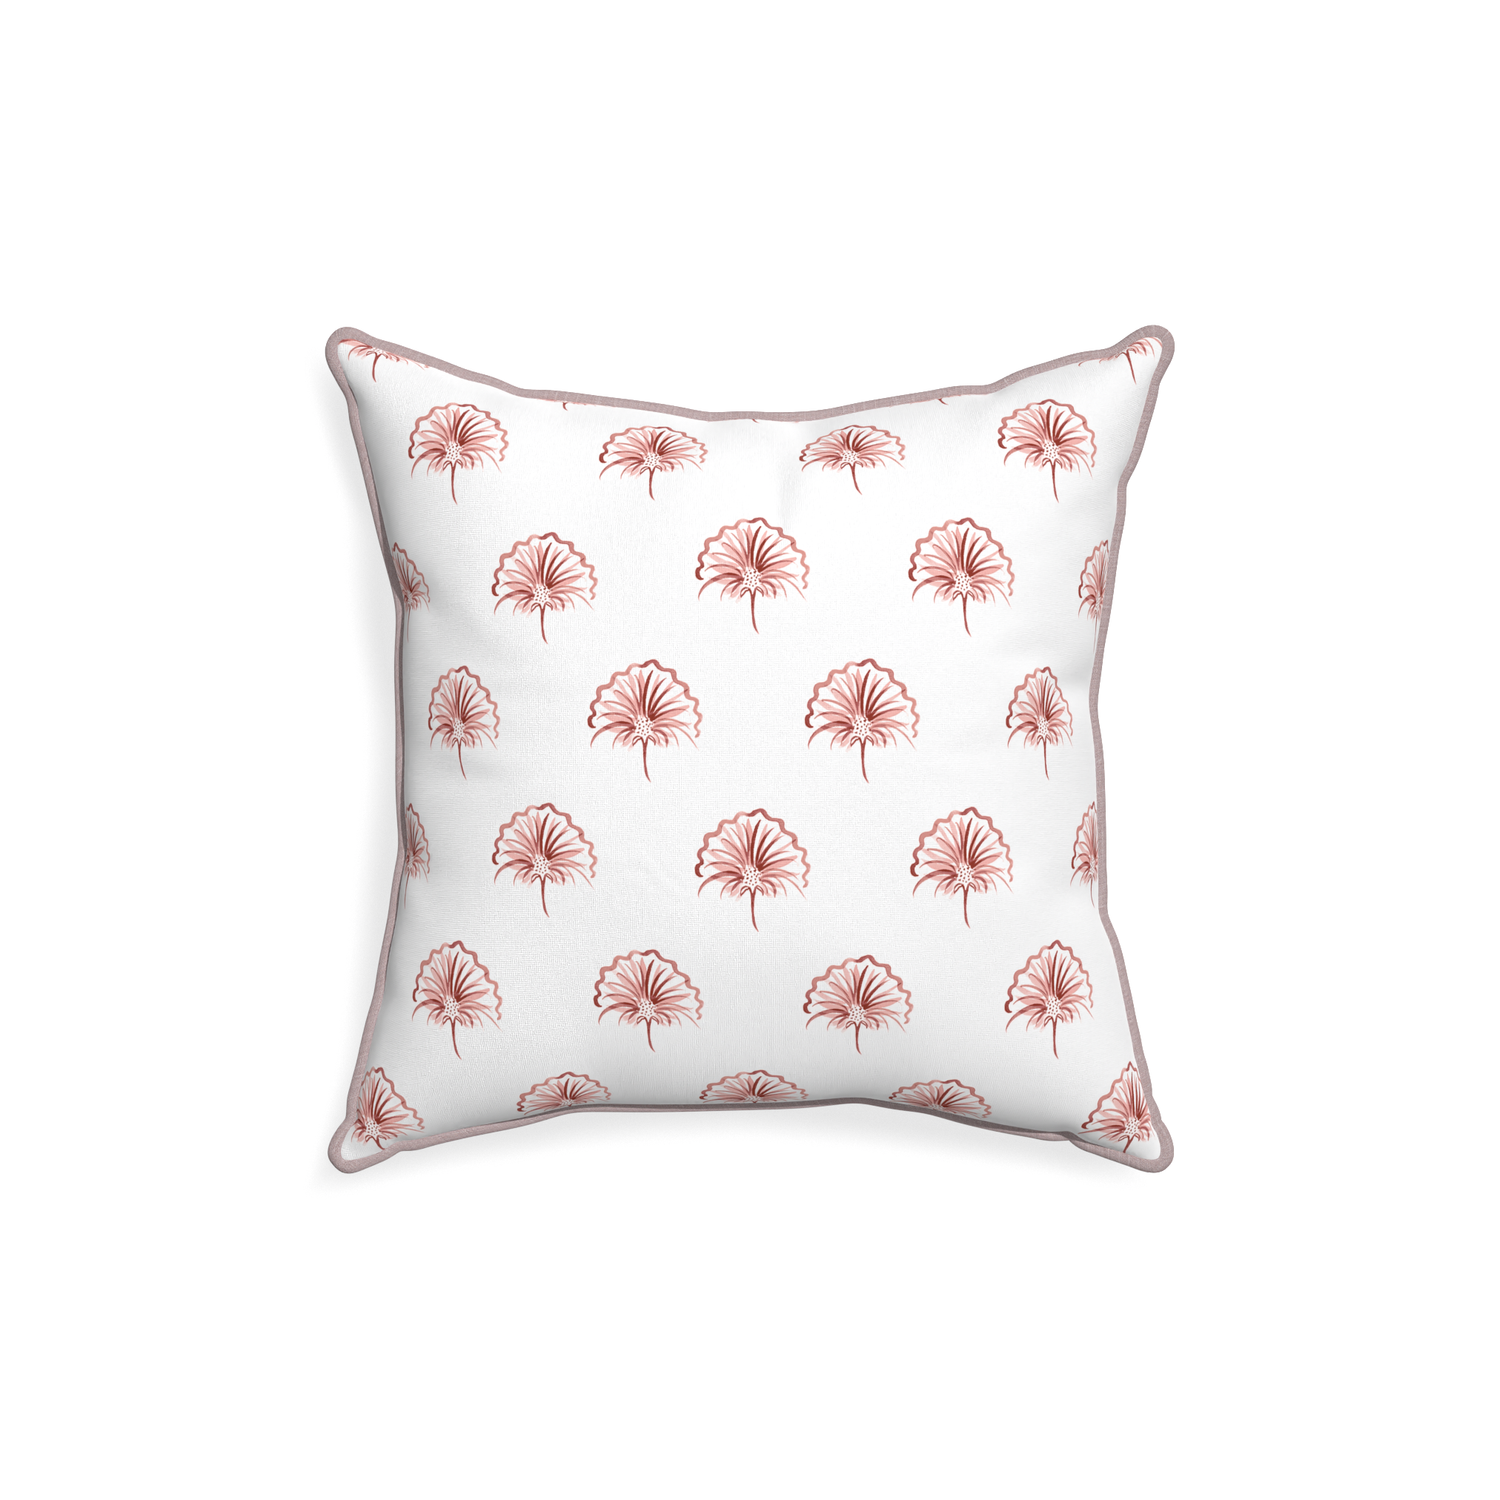 18-square penelope rose custom floral pinkpillow with orchid piping on white background